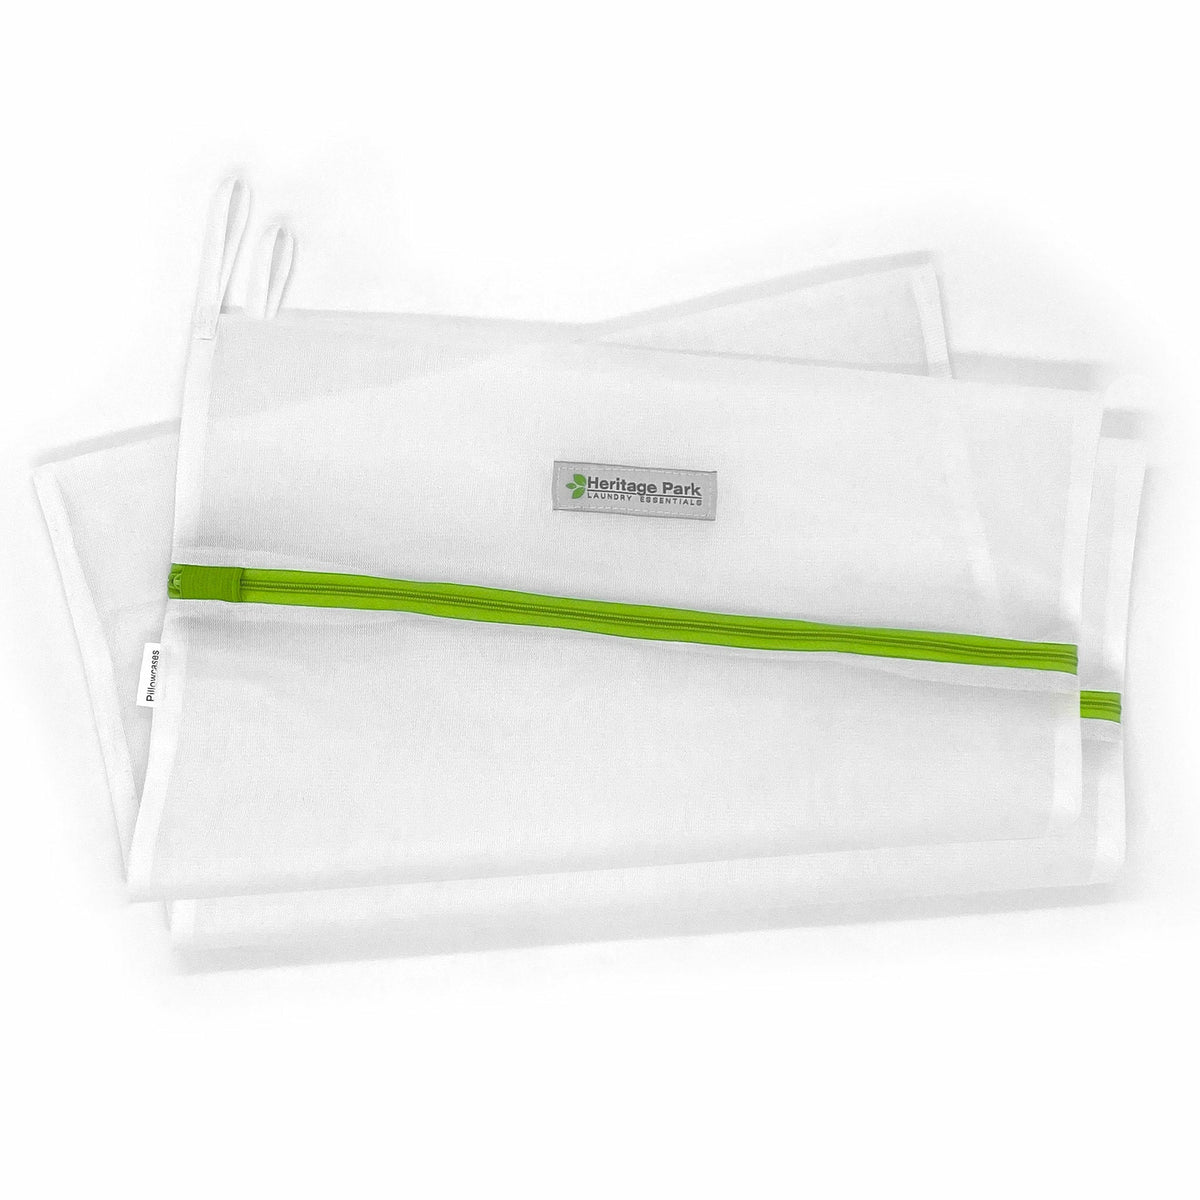 FLandB Branded Mesh Bags by Heritage Park